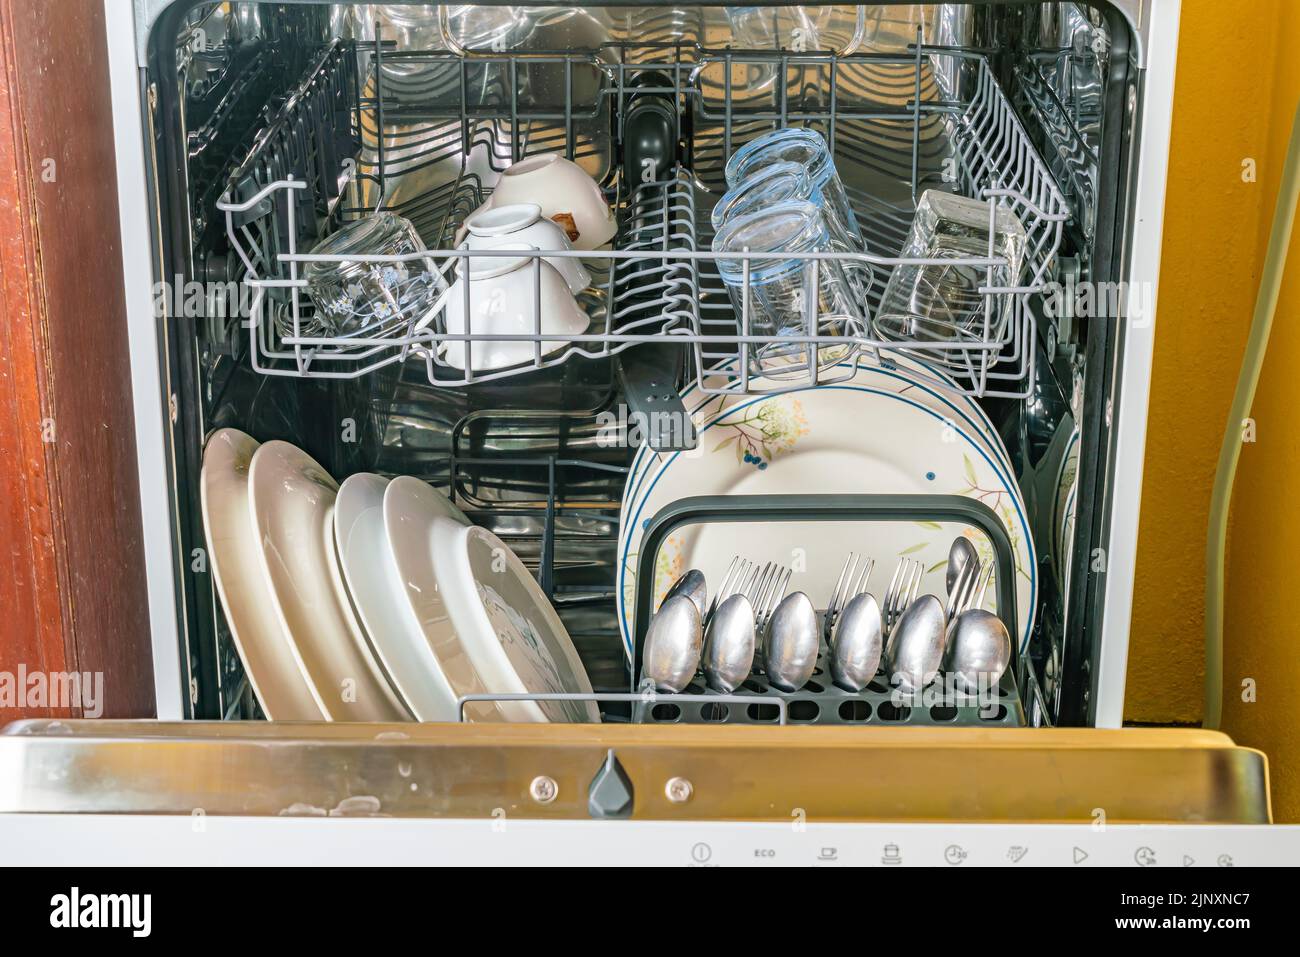 Front view of opened dish washer with clean dishes, glassware and other kitchen utensils after cleaning. Stock Photo